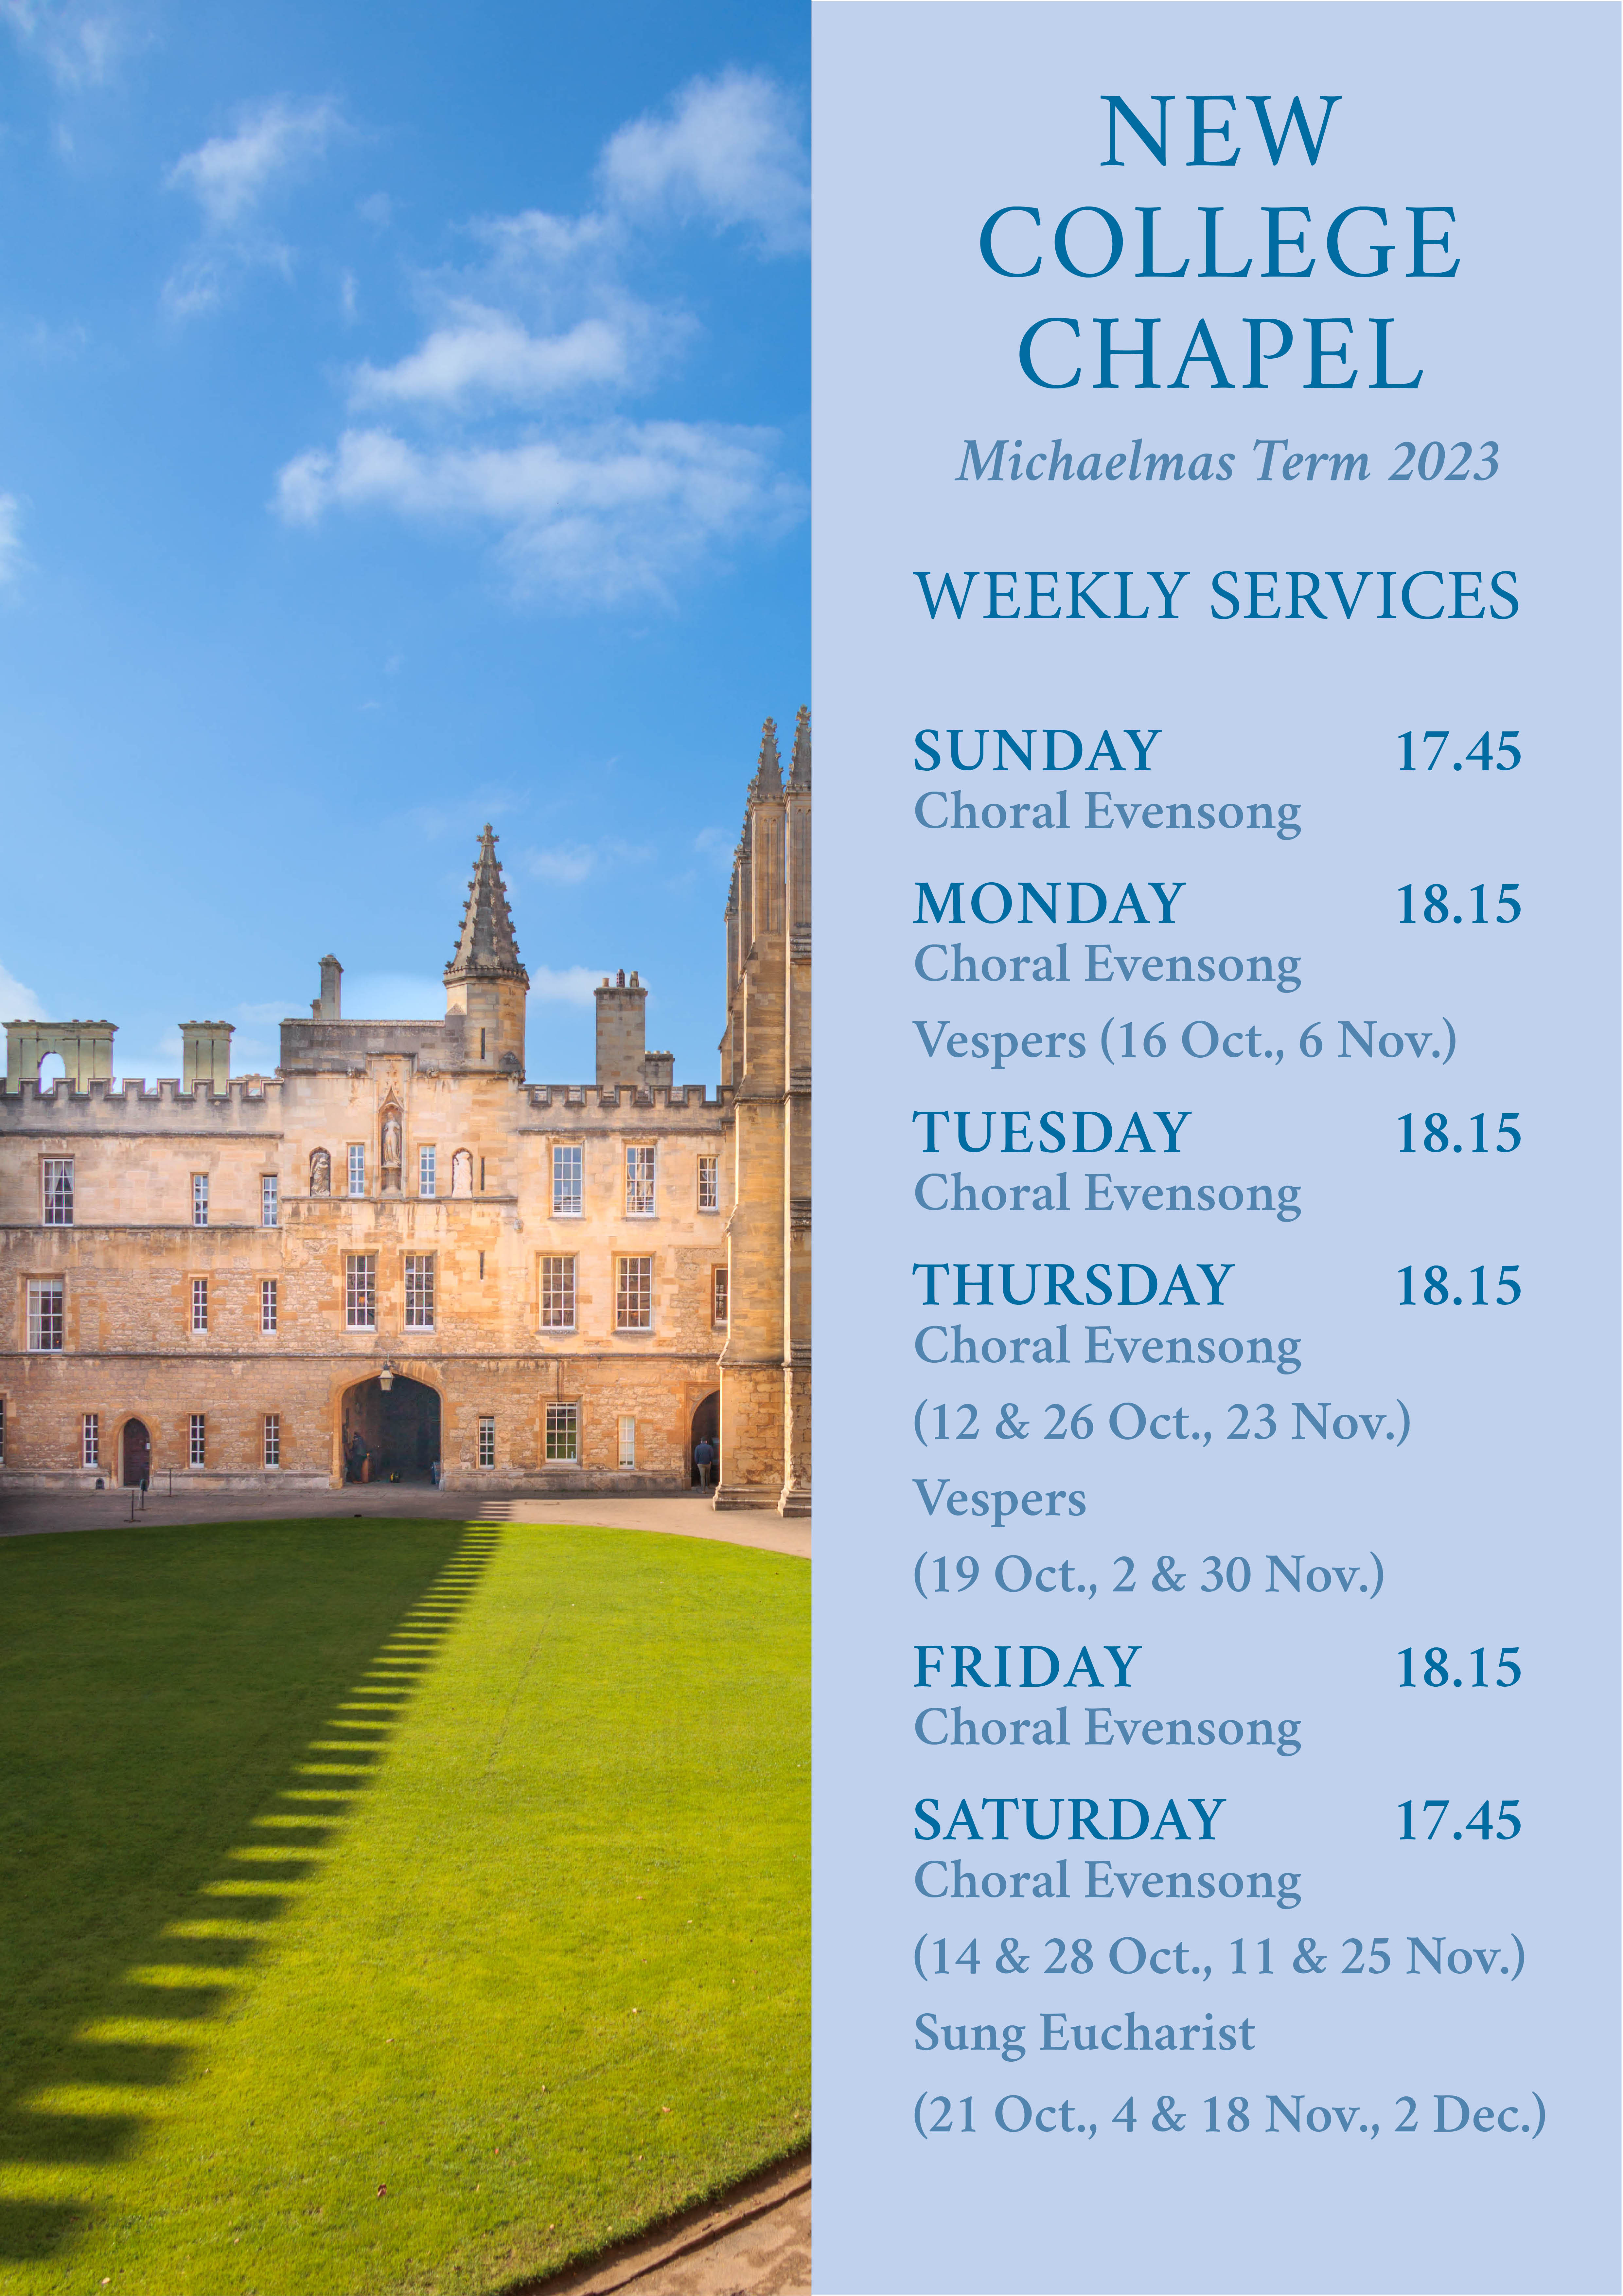 New College Chapel Weekly Services Michaelmas Term 2023